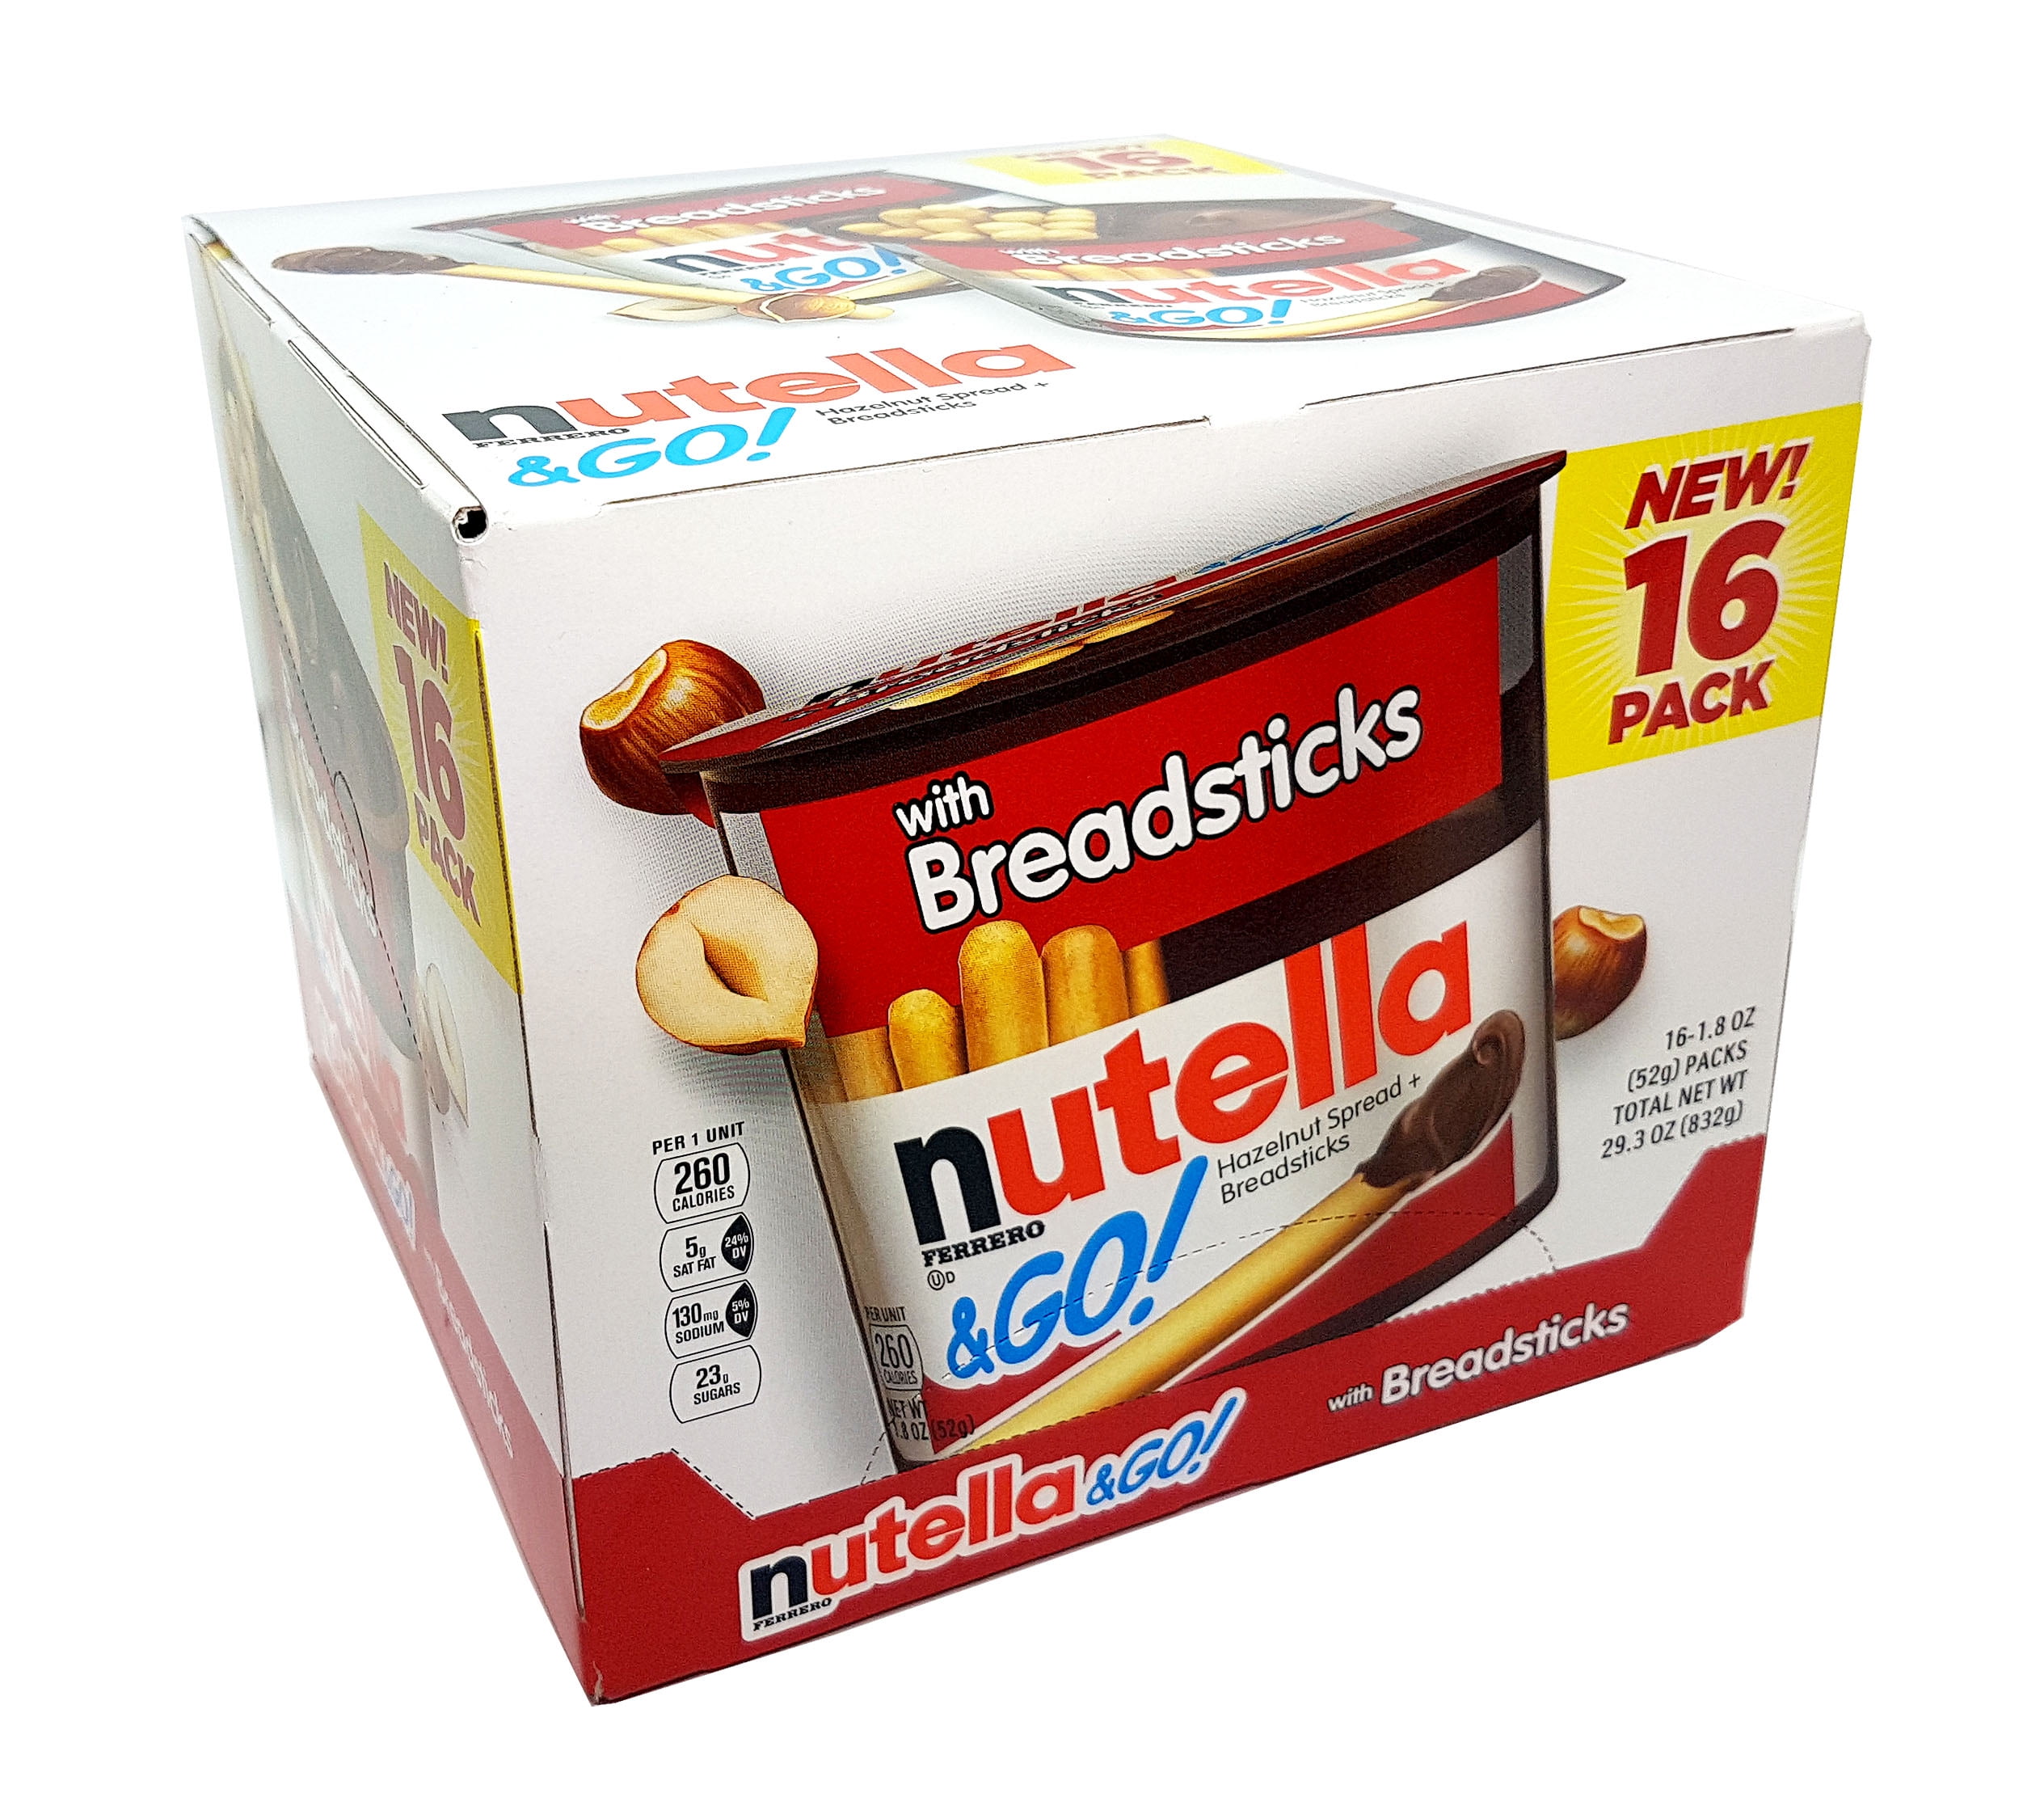  Nutella and GO! Snack (Nutella 39g, Sticks 13g) 1 Piece :  Grocery & Gourmet Food